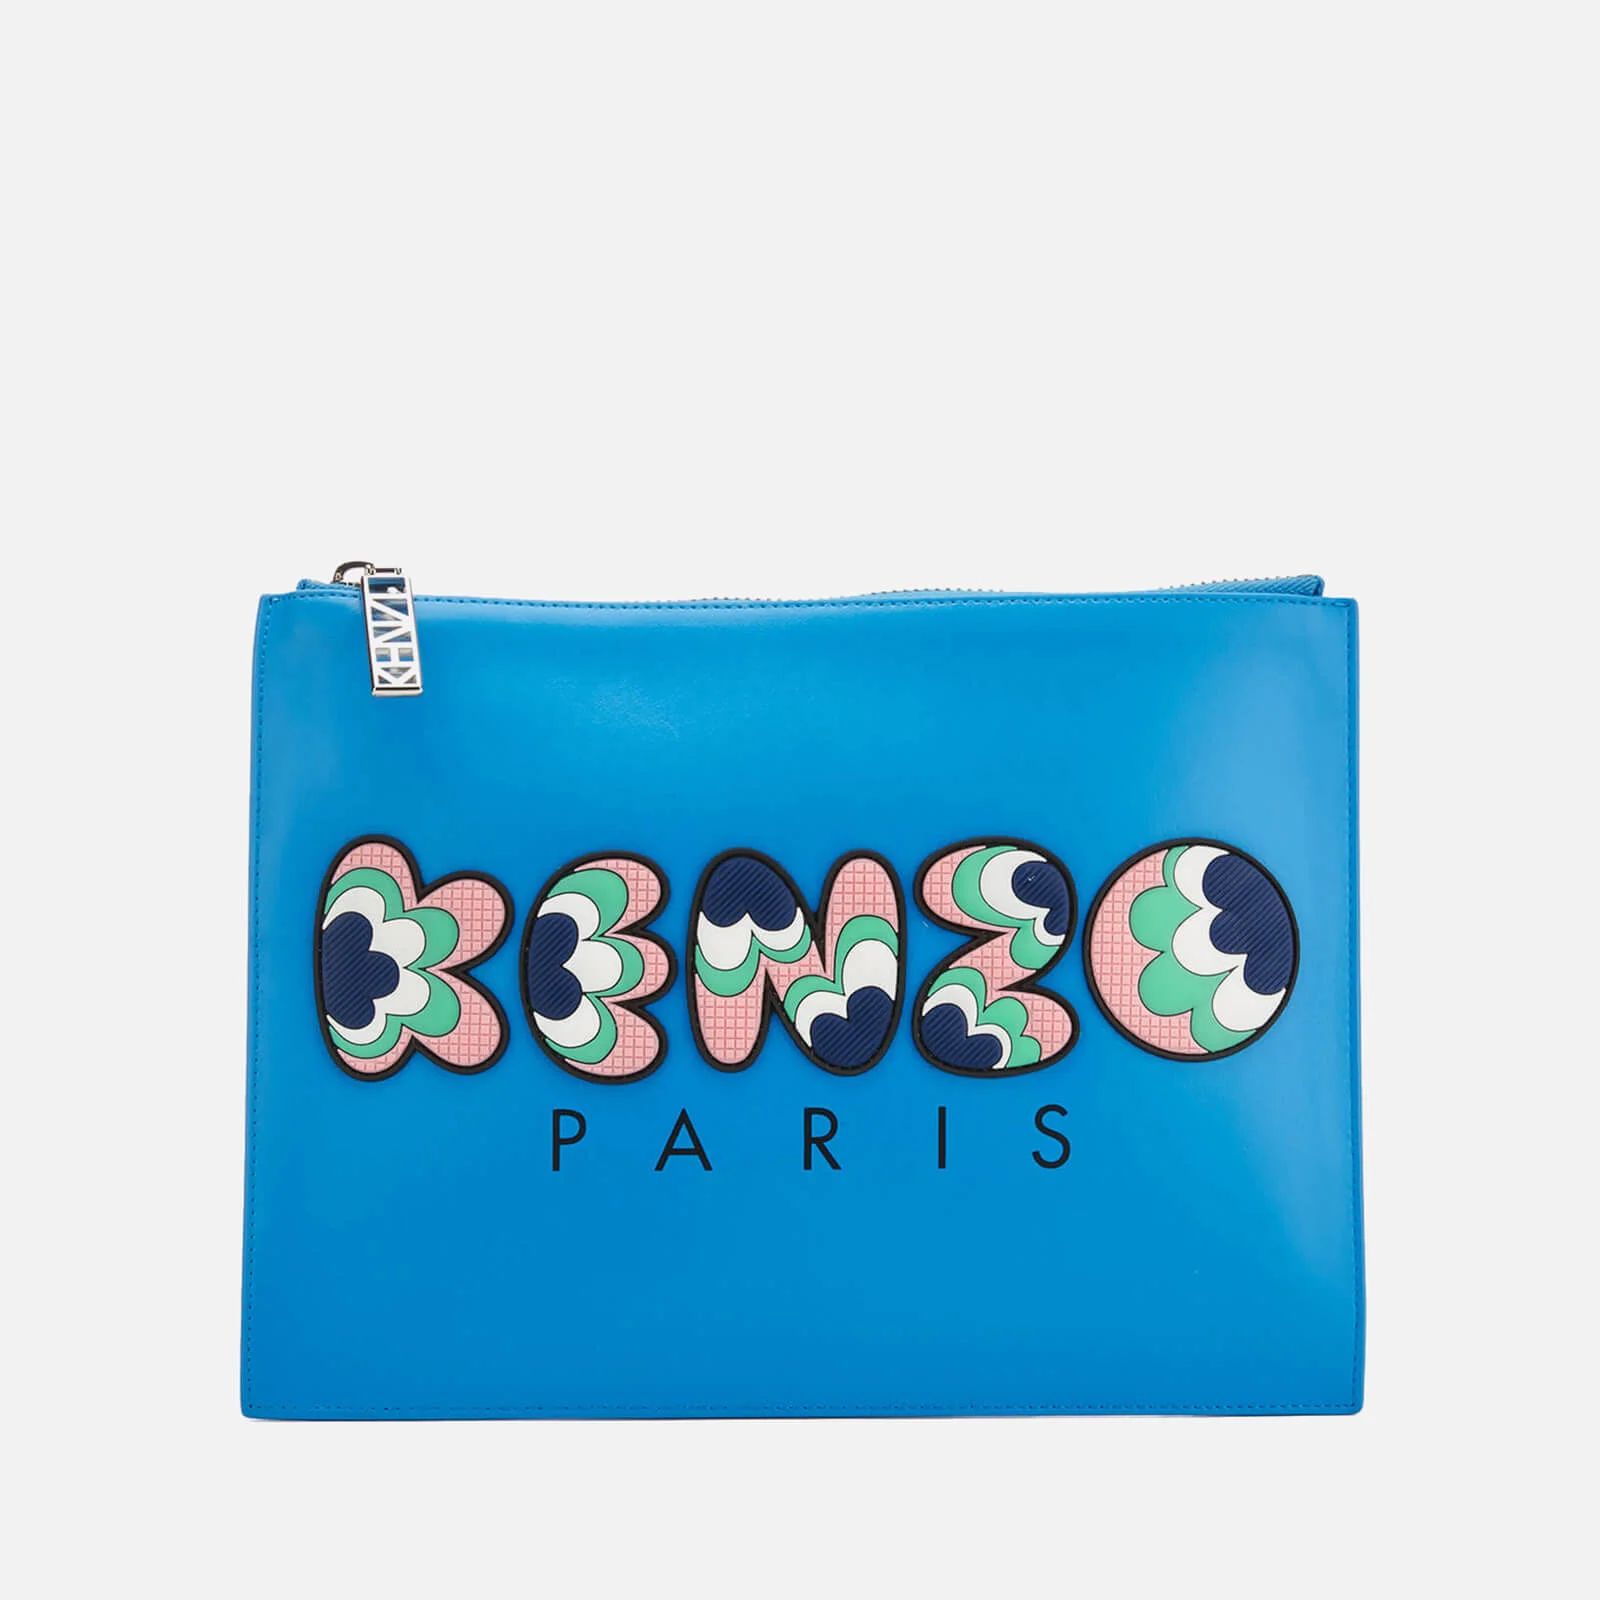 KENZO Women's Occasions A4 Pouch - Blue Image 1